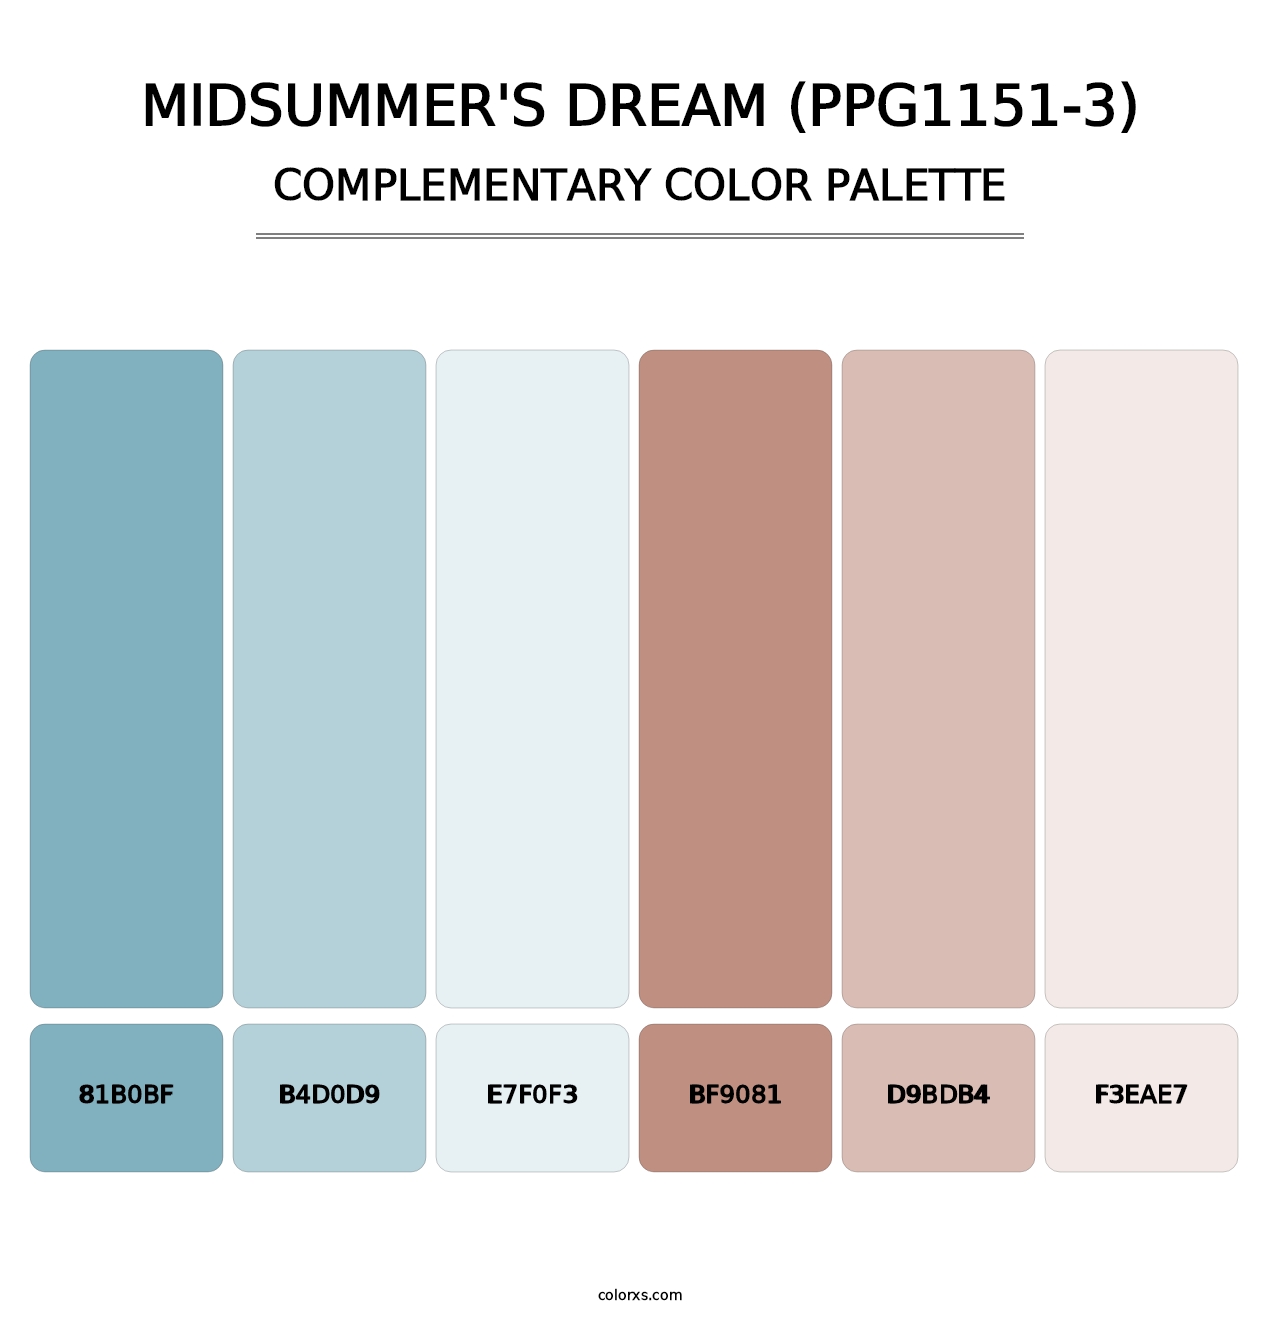 Midsummer's Dream (PPG1151-3) - Complementary Color Palette